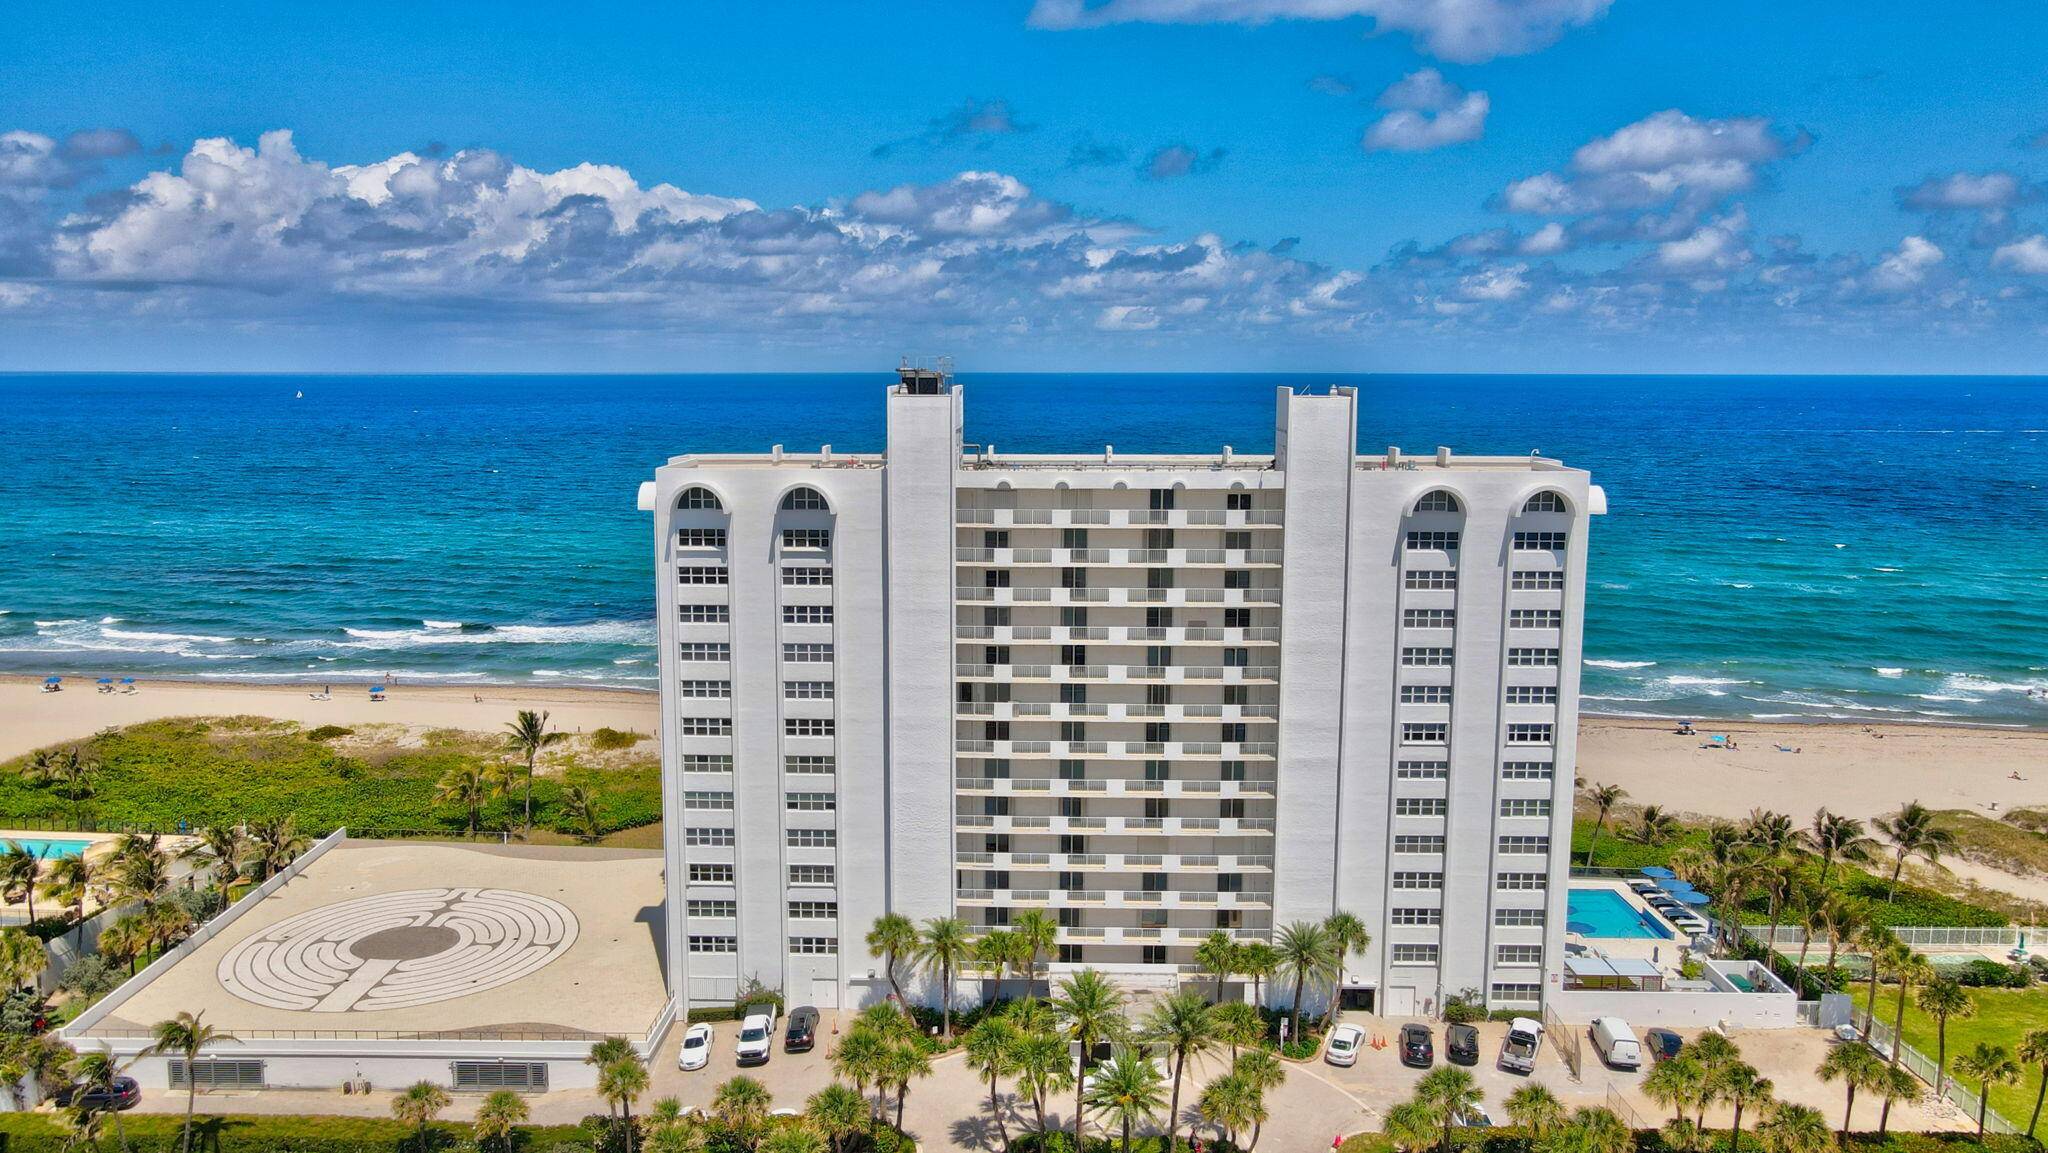 FROM THE MINUTE YOU WALK INTO this 3 bedroom 2 bath CORNER condo you see the most spectacular ocean views CONDO HAS BEEN REMODELED WITH PORCELAIN TILE FLOORS THROUGHOUT, S ...